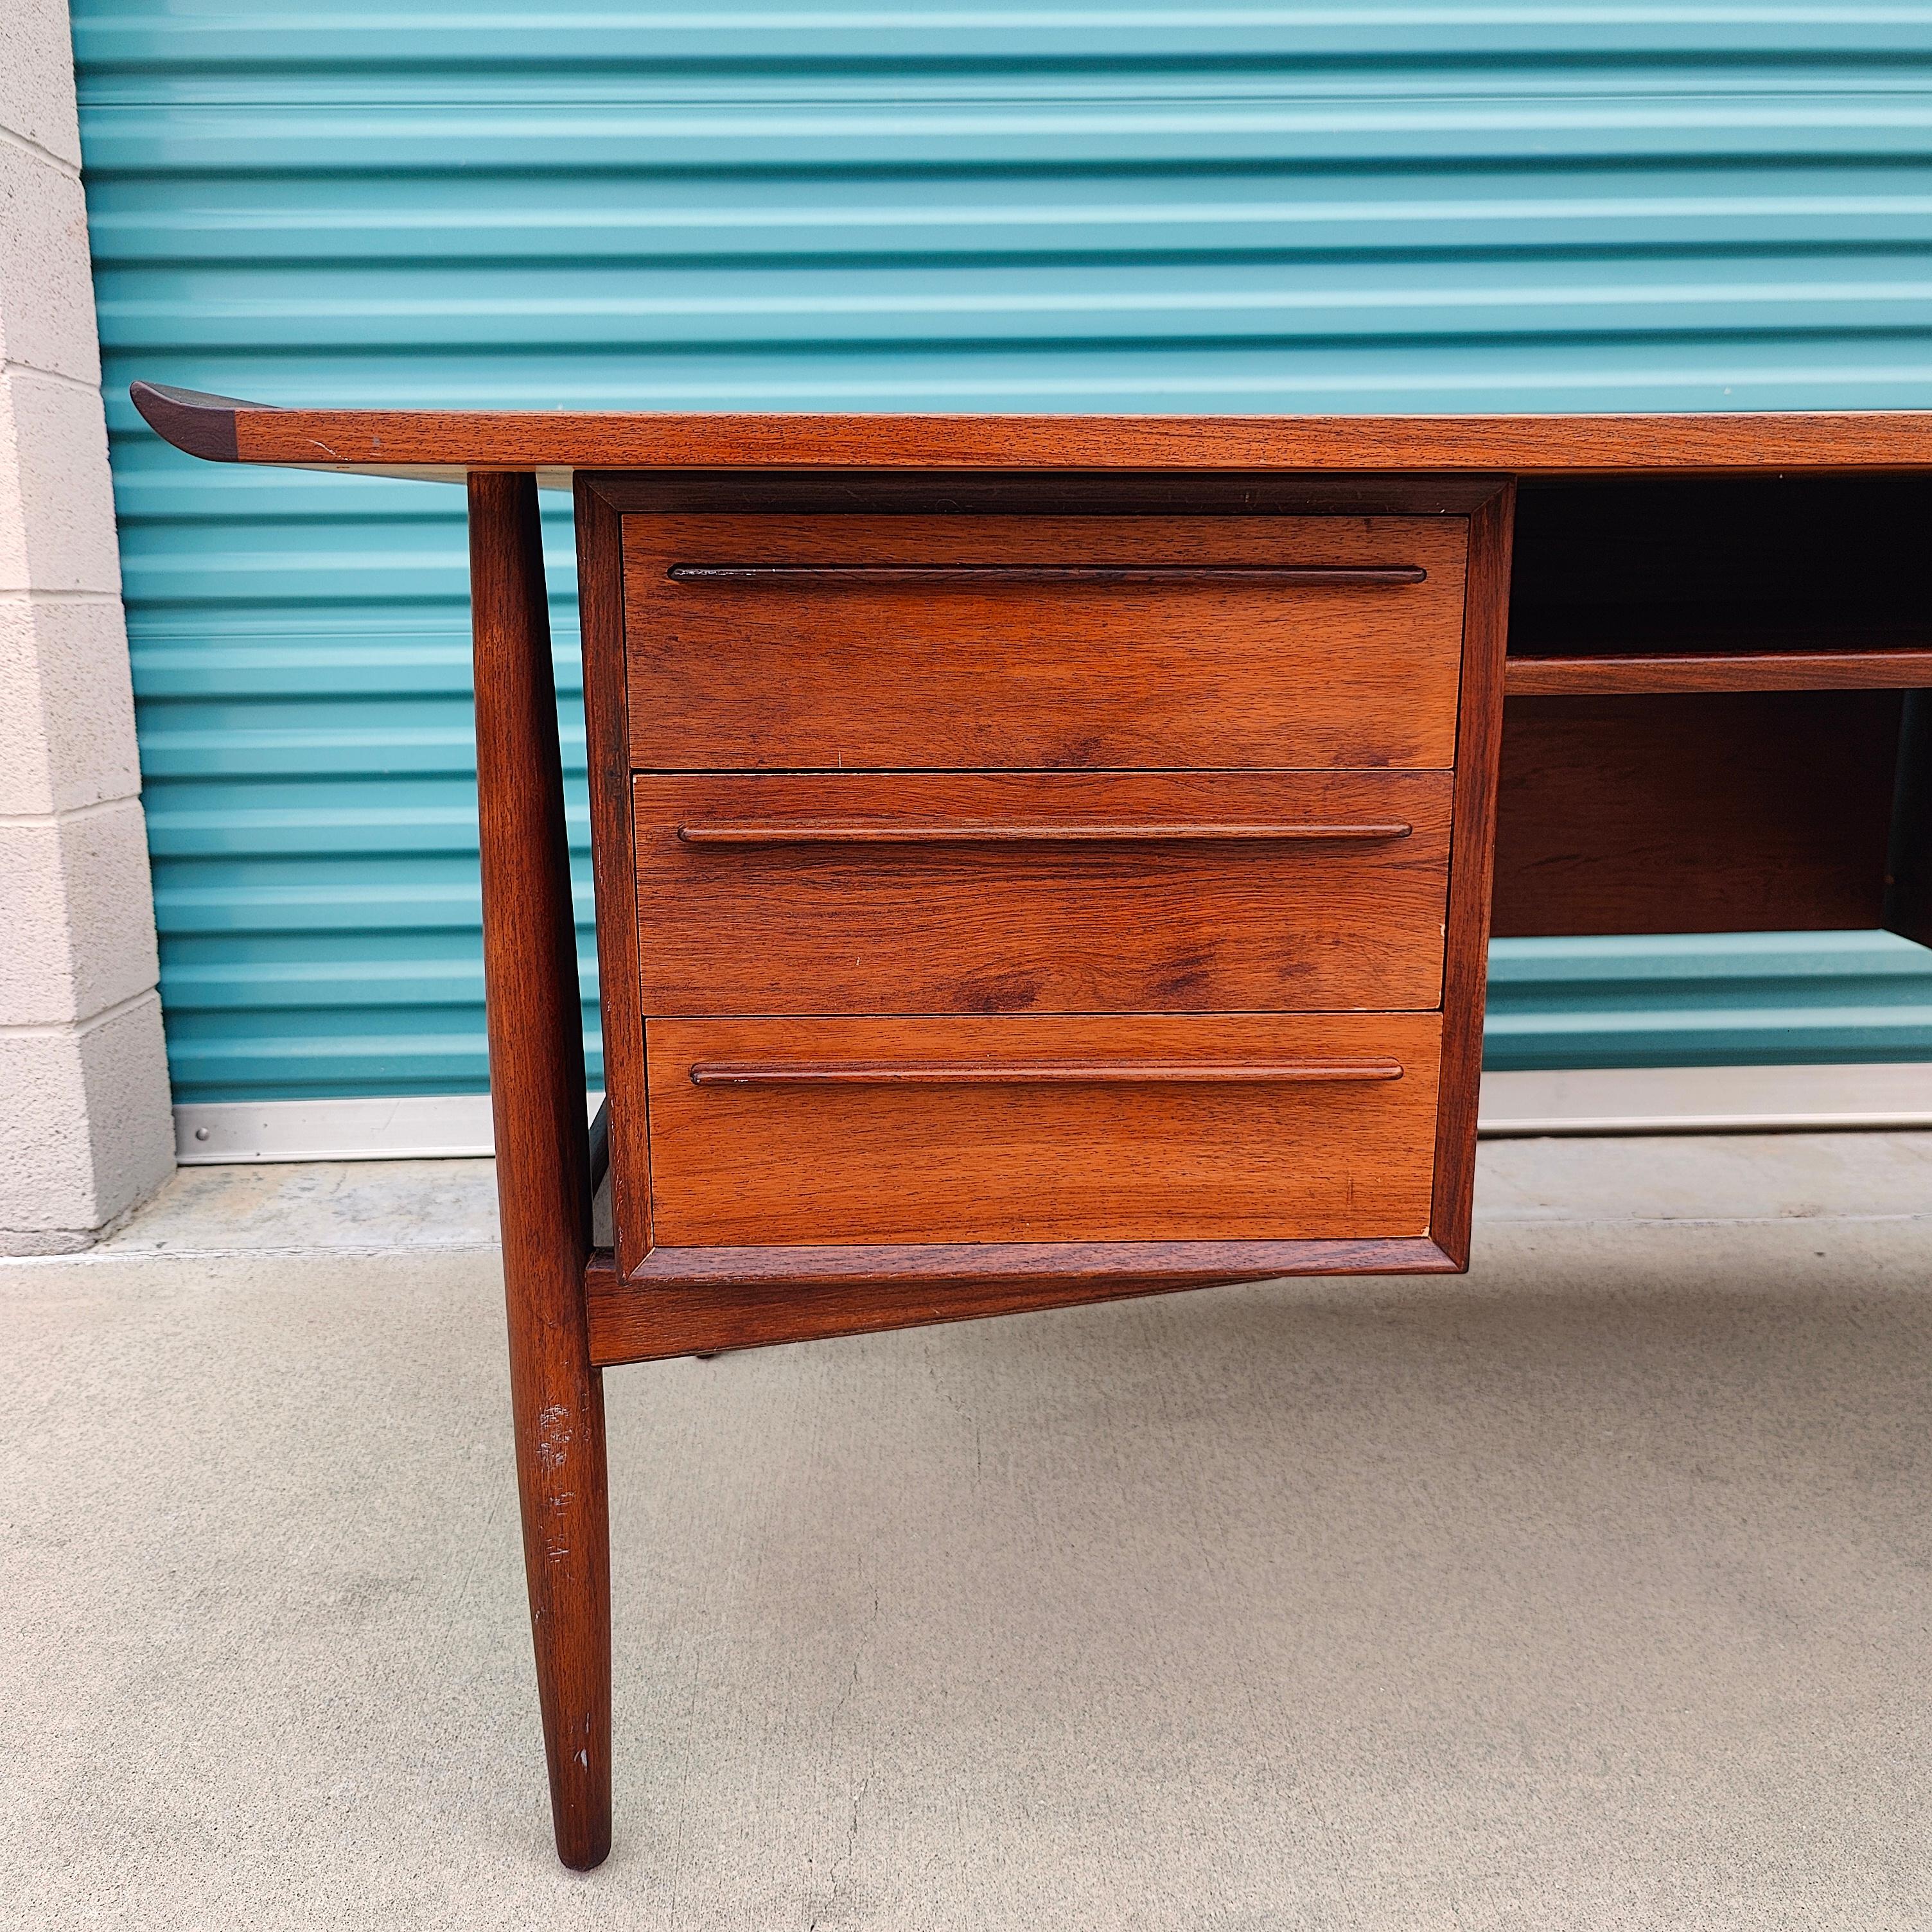 Just in, a desk designed by Arne Vodder for H.P. Hansen, c1960s. Being offered in original condition and priced accordingly. Measures approximately 60w x 29.5d x 28.25h. Features a beautiful rosewood grain finish with 3 dovetailed drawers and filing